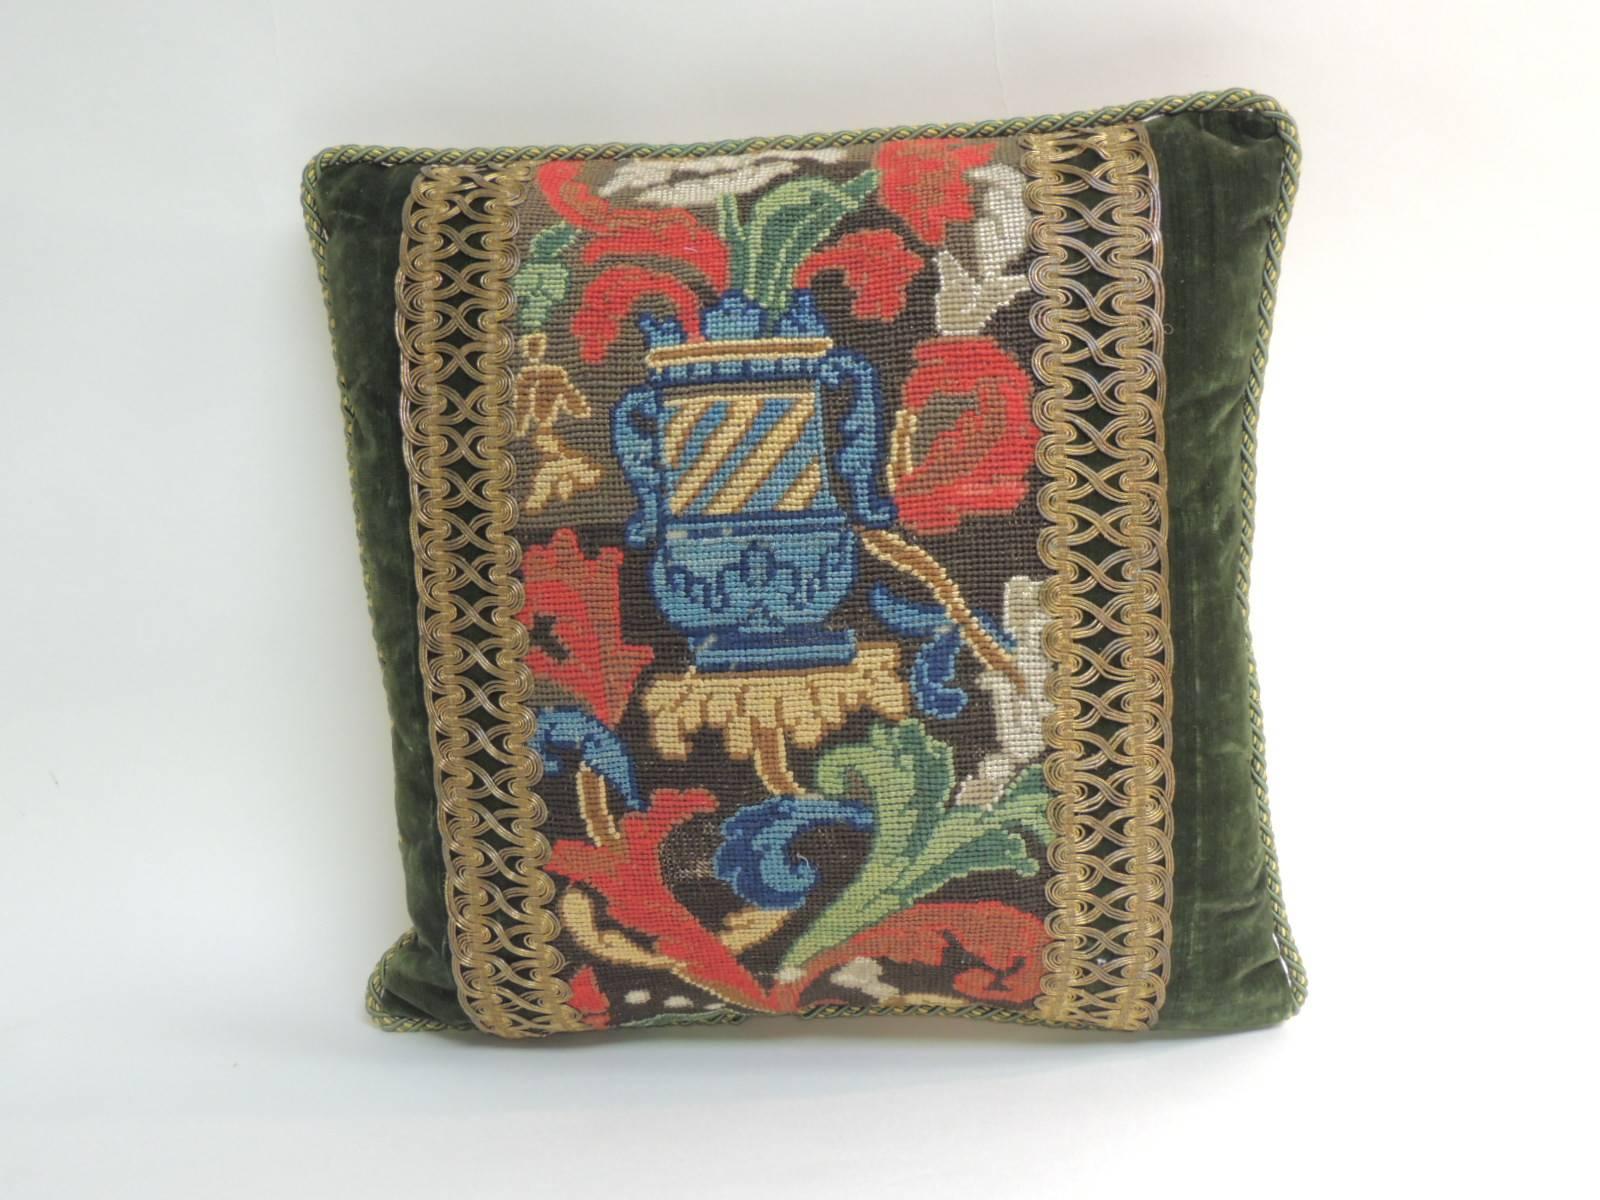 One-of-the-kind: 19th century needlepoint colorful tapestry in the center of the pillow. Decorative one-of-a-kind pillow embellished with a 19th century metallic woven gold trim. Decorative pillow antique textile framed with 18th century hunter